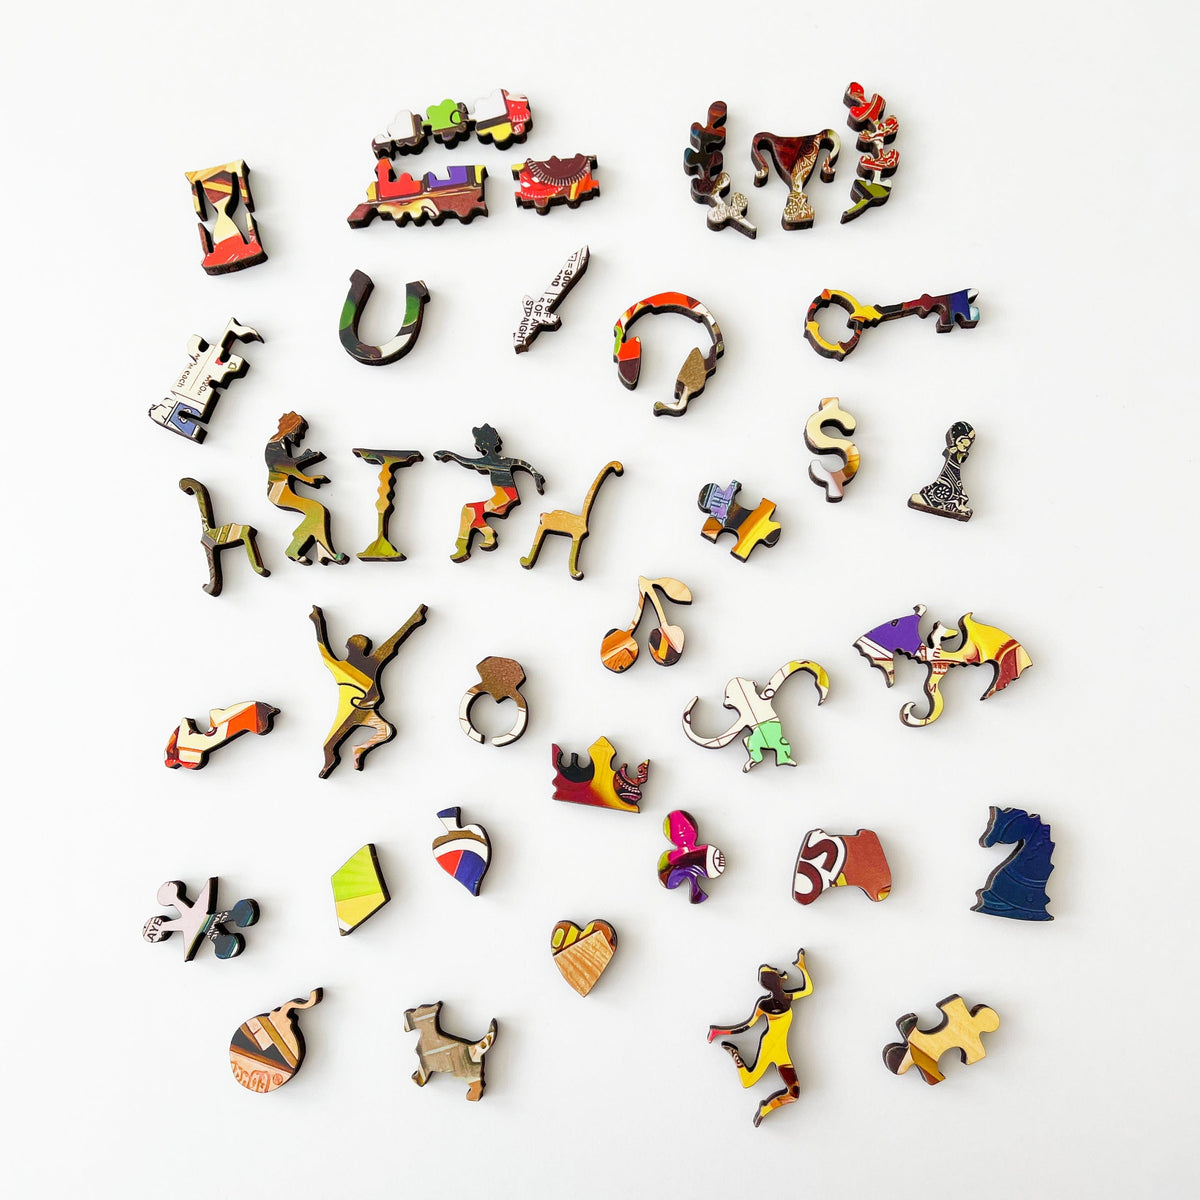 Hand-drawn Whimsical puzzle pieces